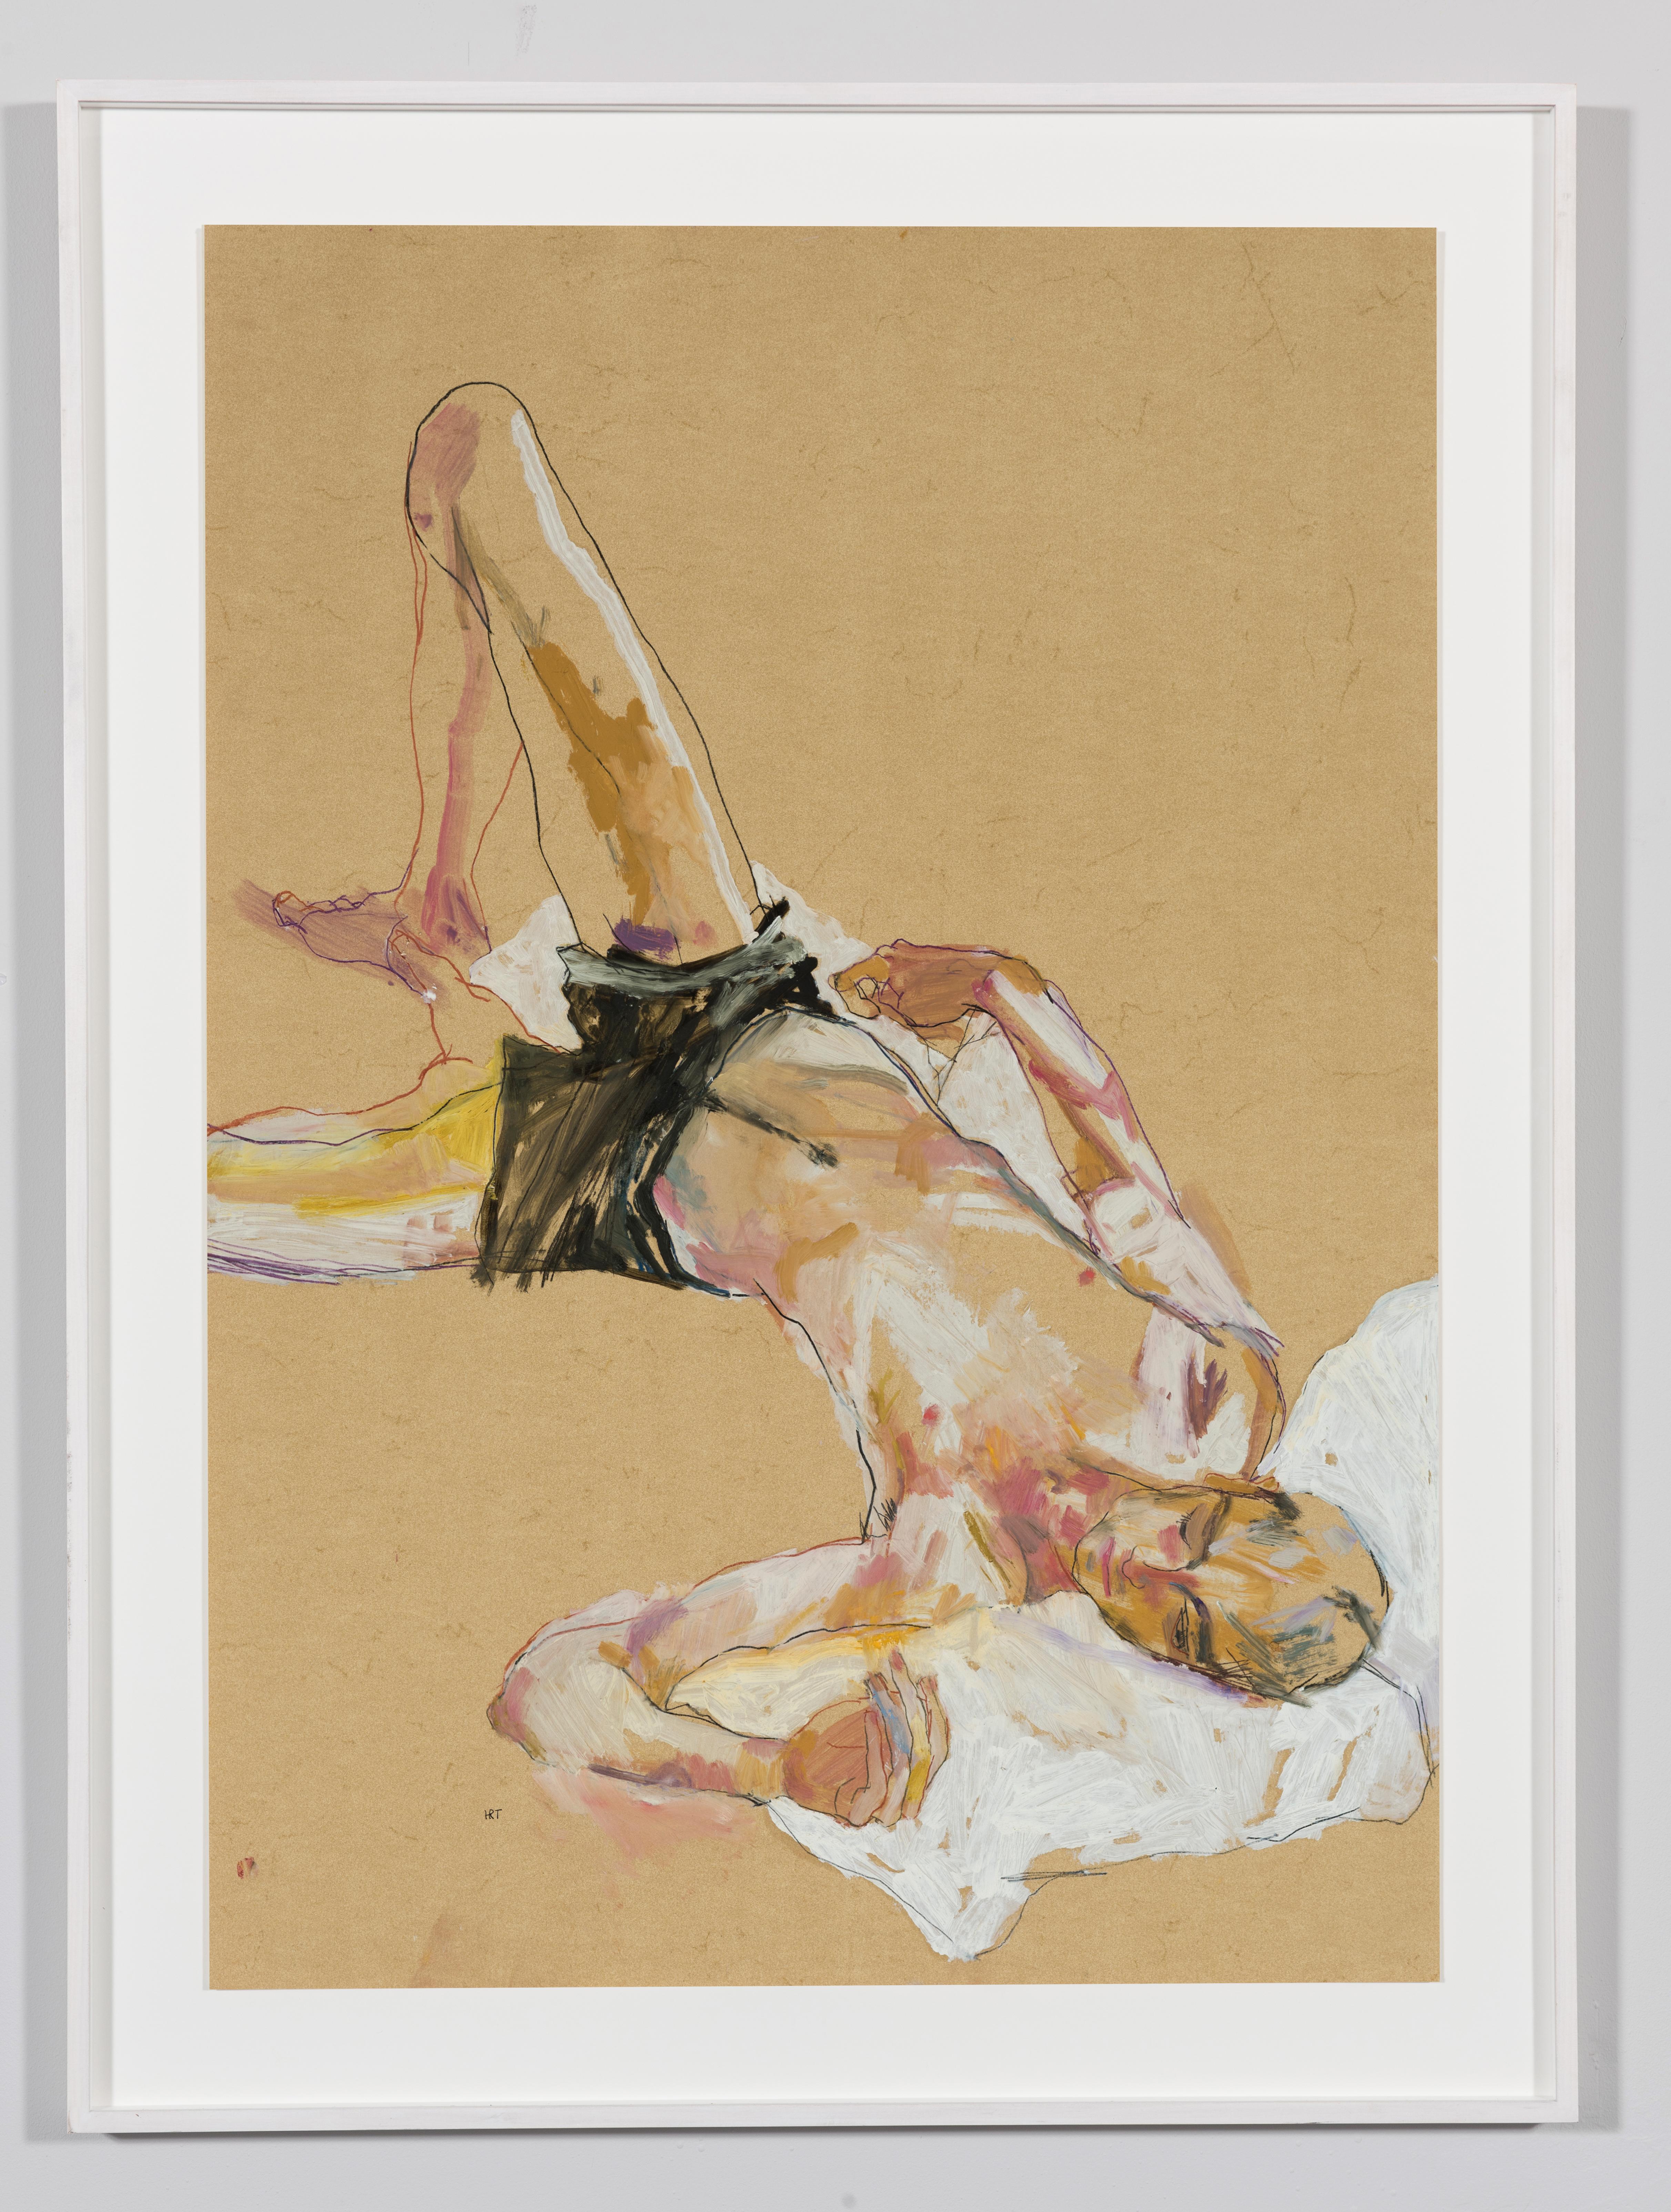 Andrew (Lying on White Pillow - Black Shorts), Mixed media on ochre parchment - Painting by Howard Tangye